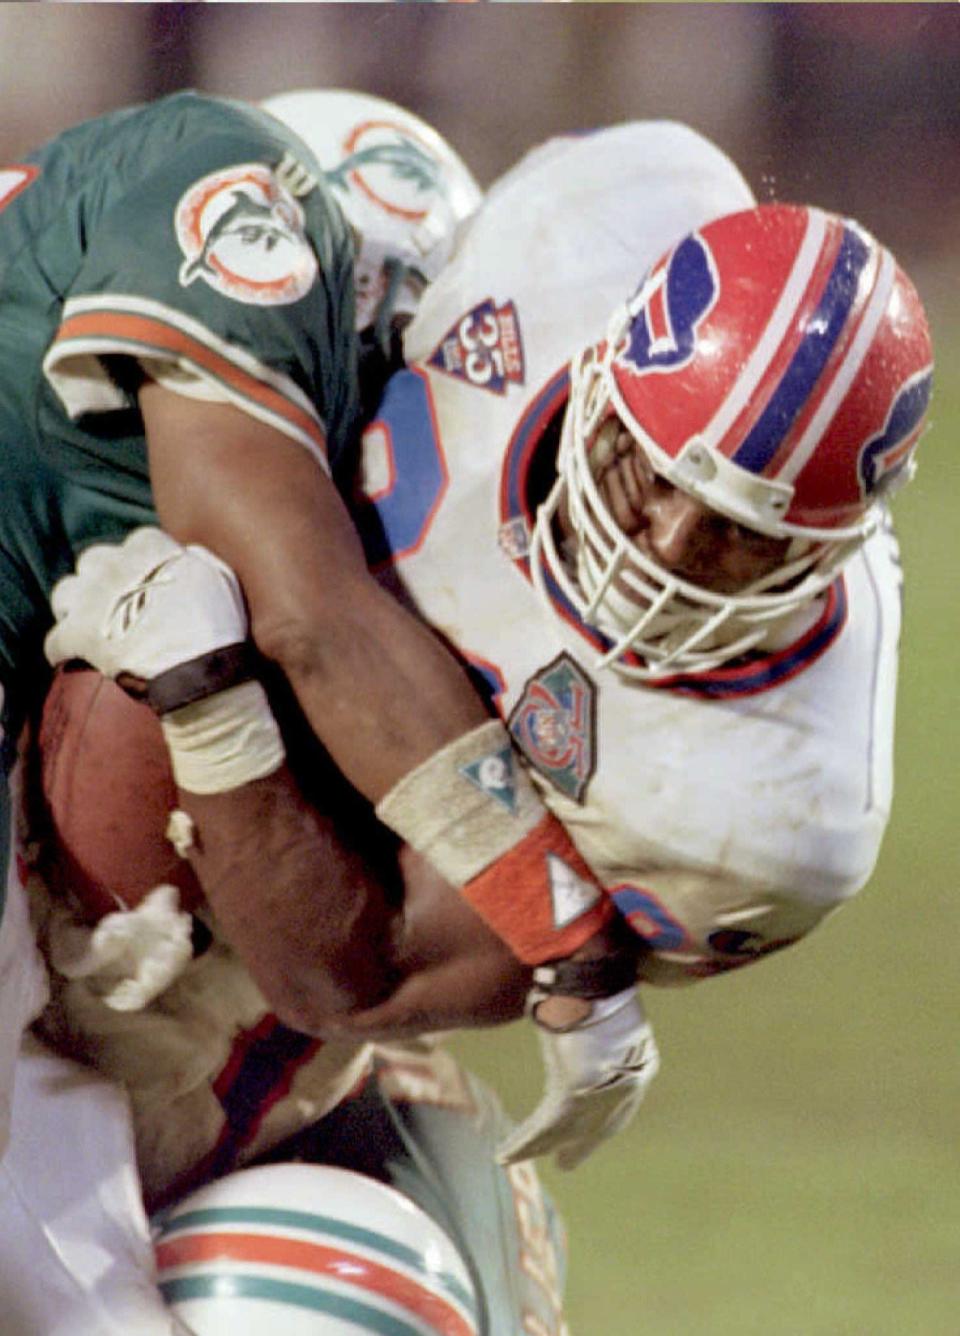 Buffalo Bills tight end Lonnie Johnson goes for first down yardage while Miami Dolphins Michael Stewart makes the tackle during fourth quarter action in Miami on Dec. 4, 1994.